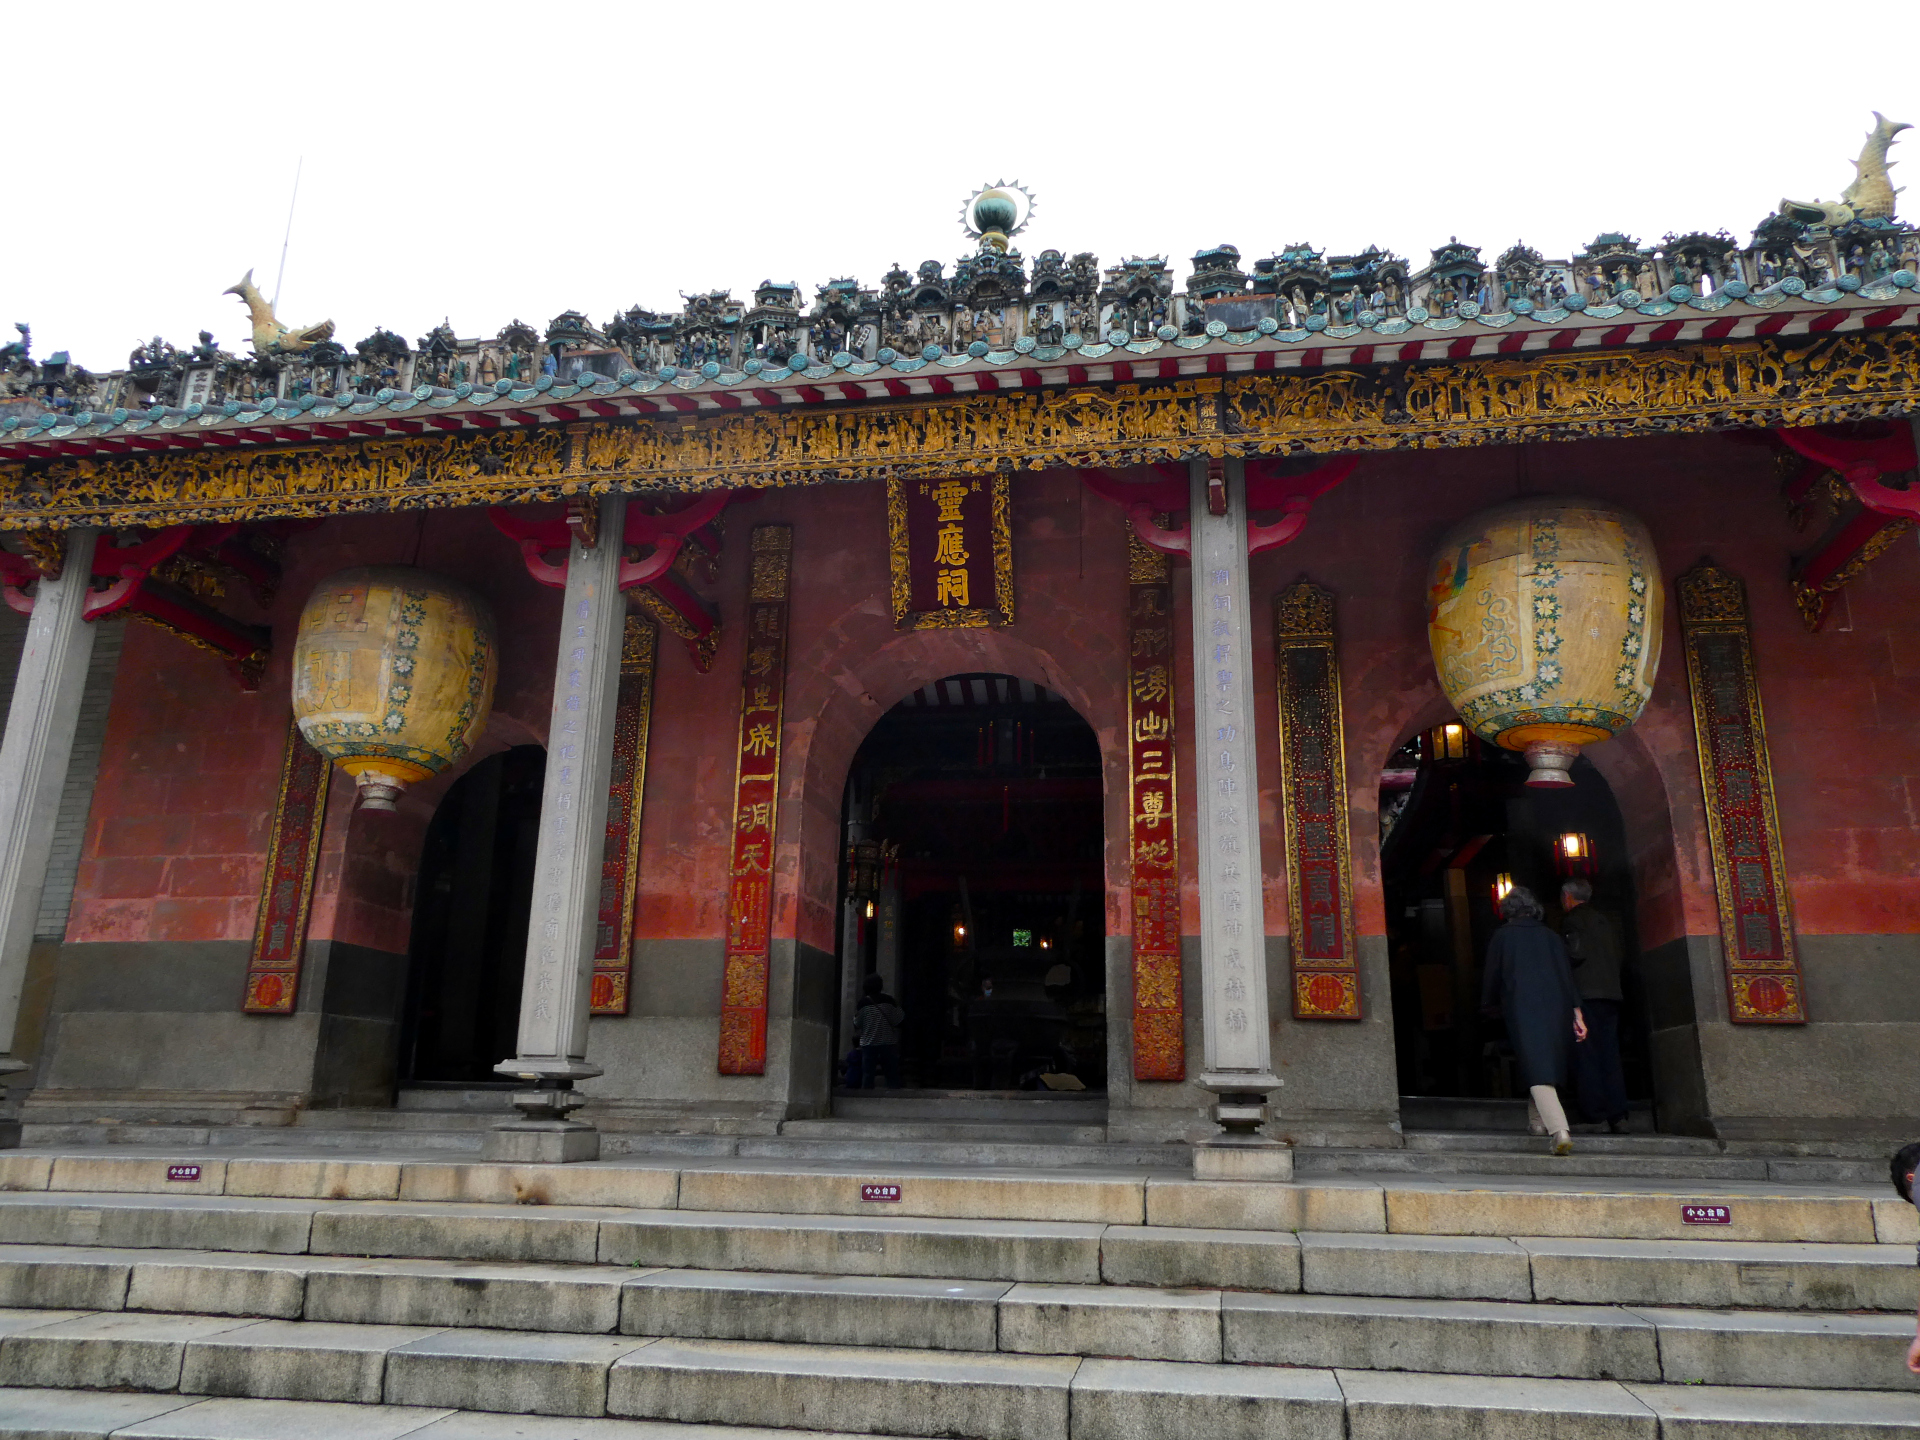 A building in the Ancestral Temple